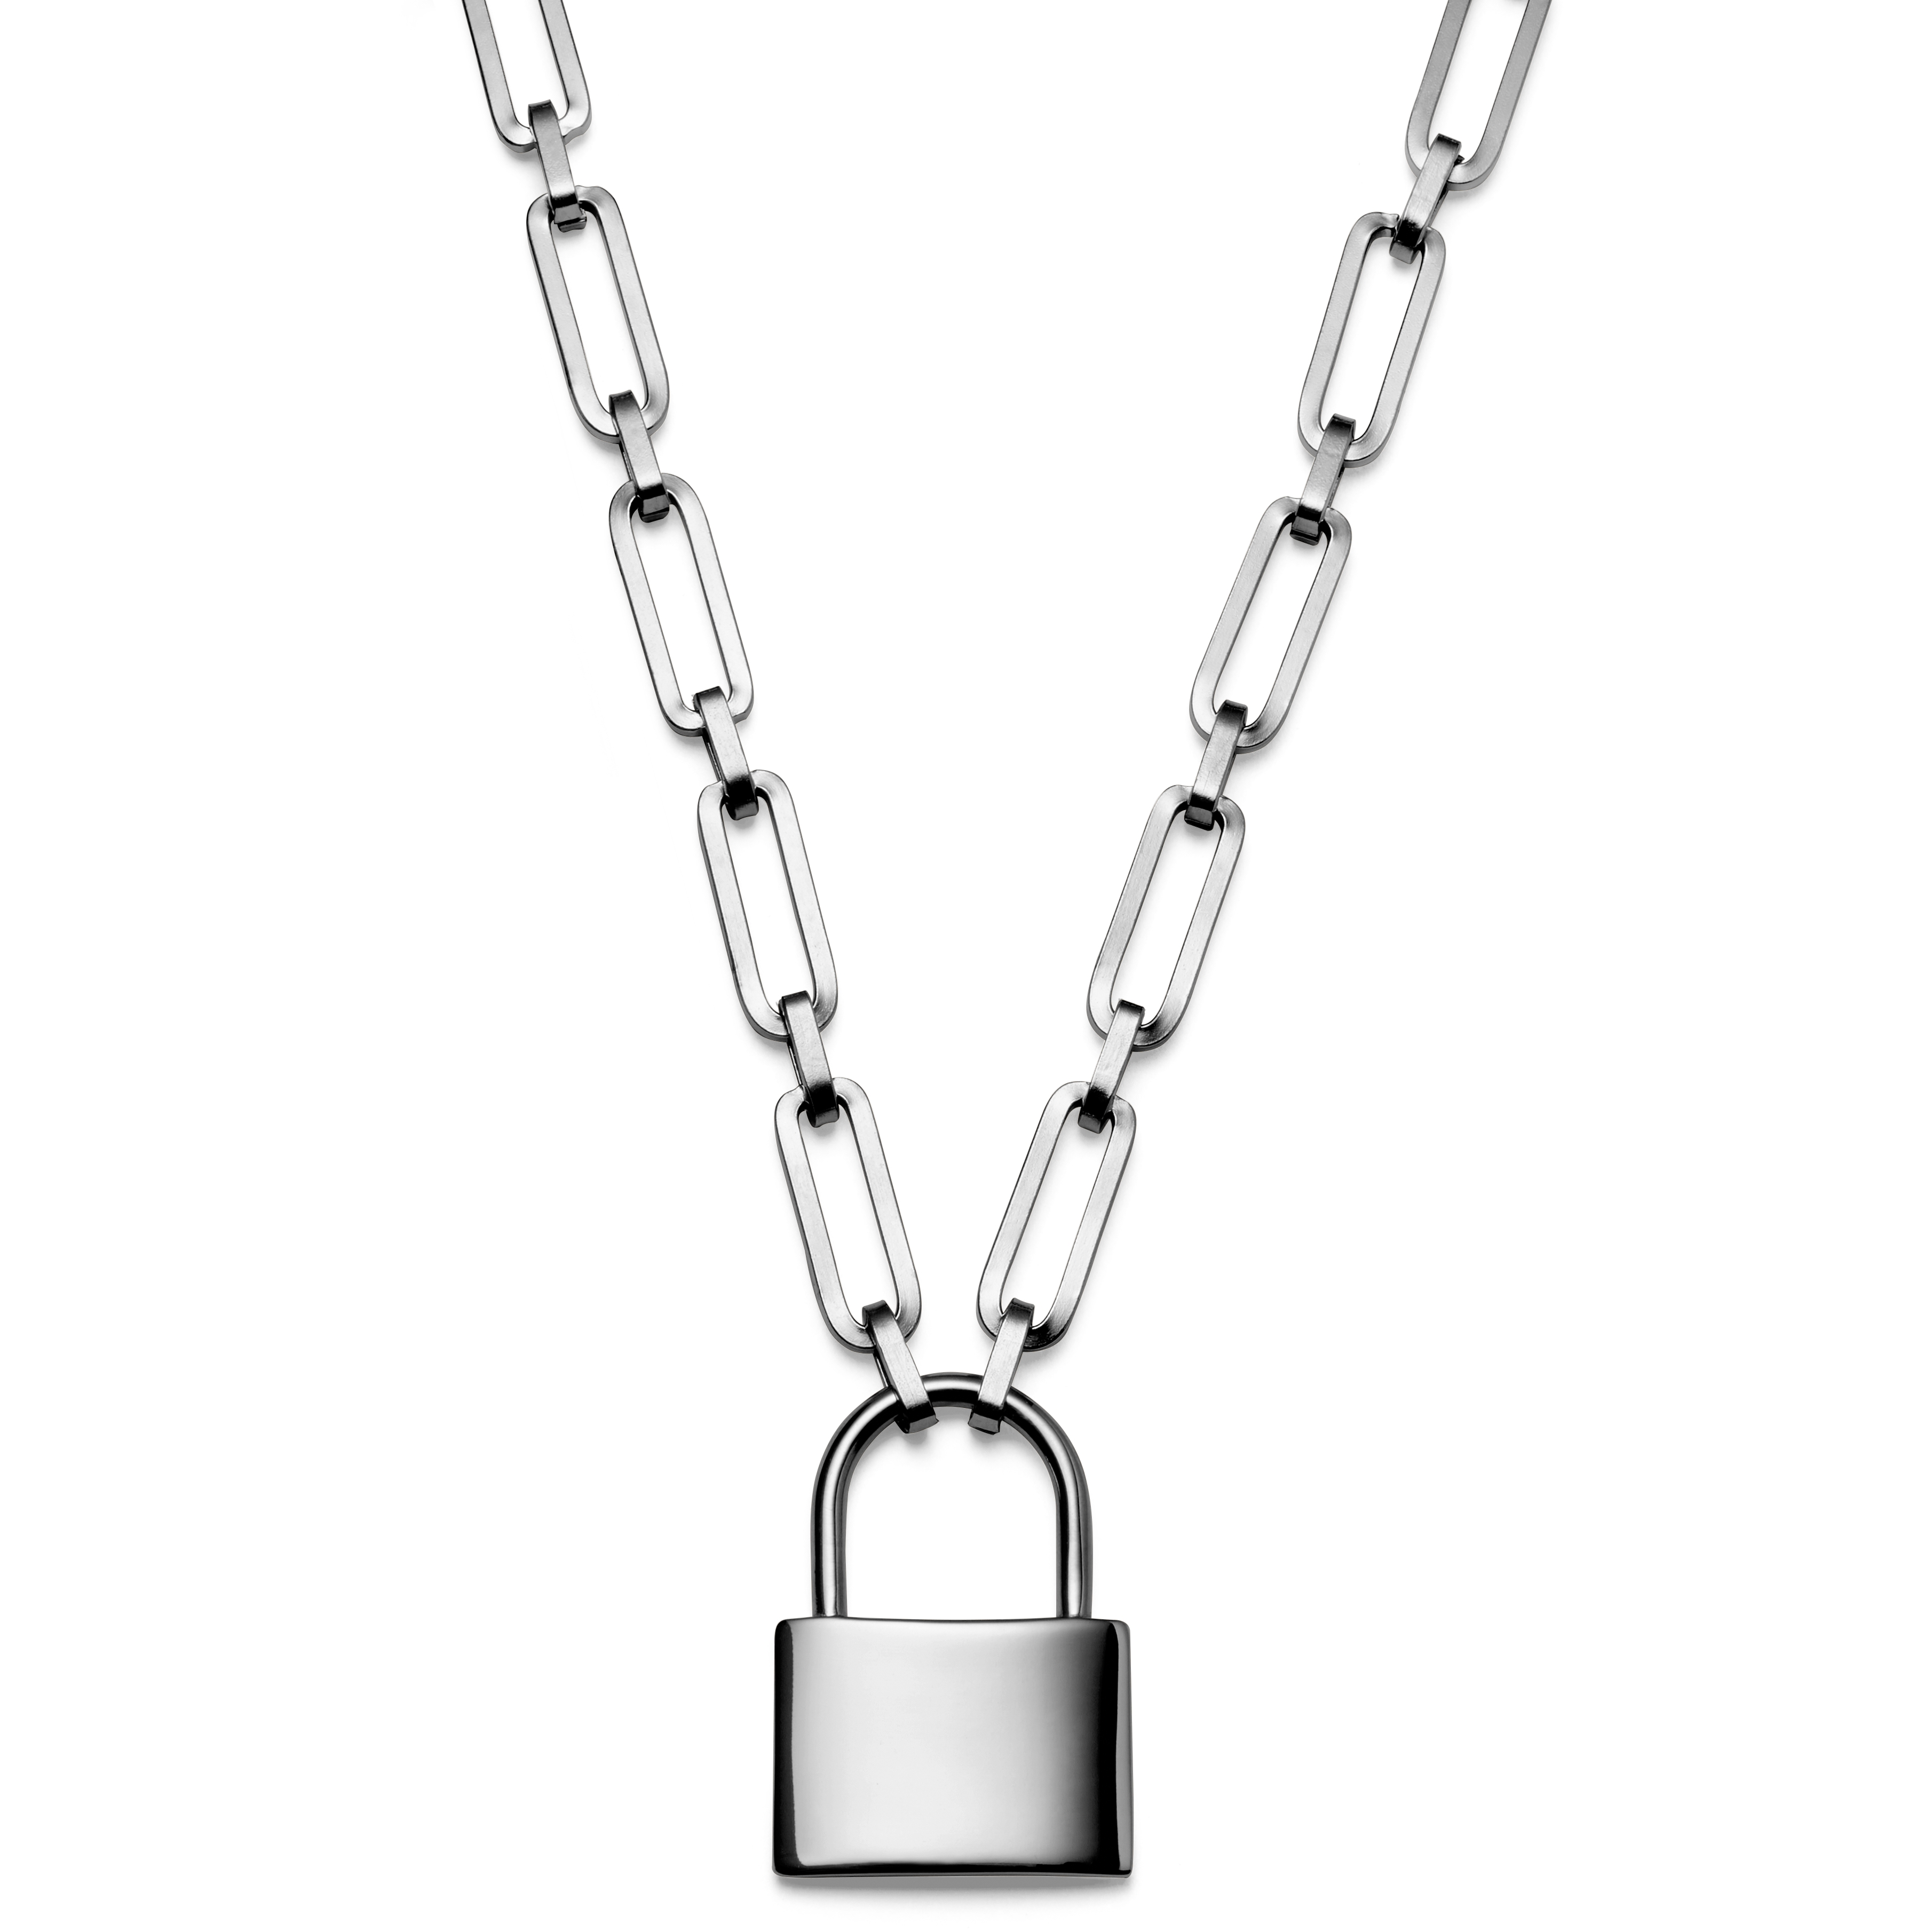 Louis Vuitton Padlock Necklace in Silver and Gold 100% Stainless Steel  Comes in Box